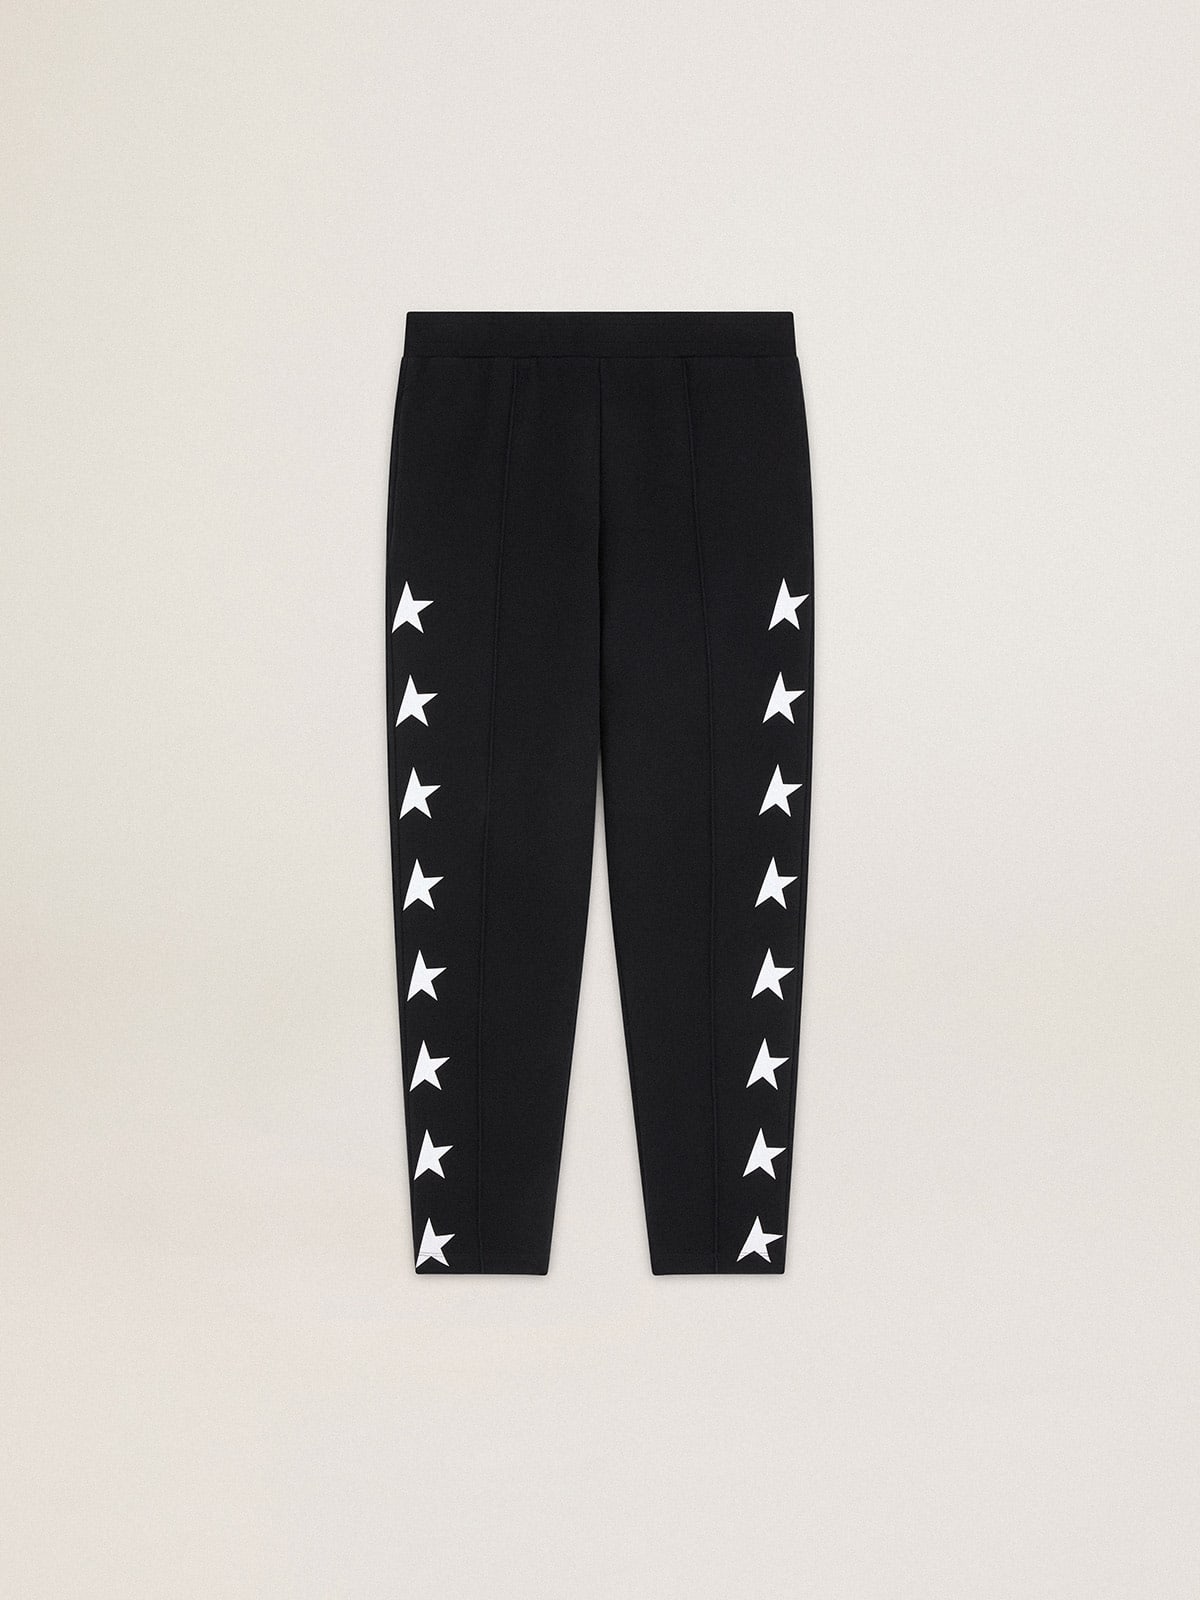 Black joggers with contrasting white stars